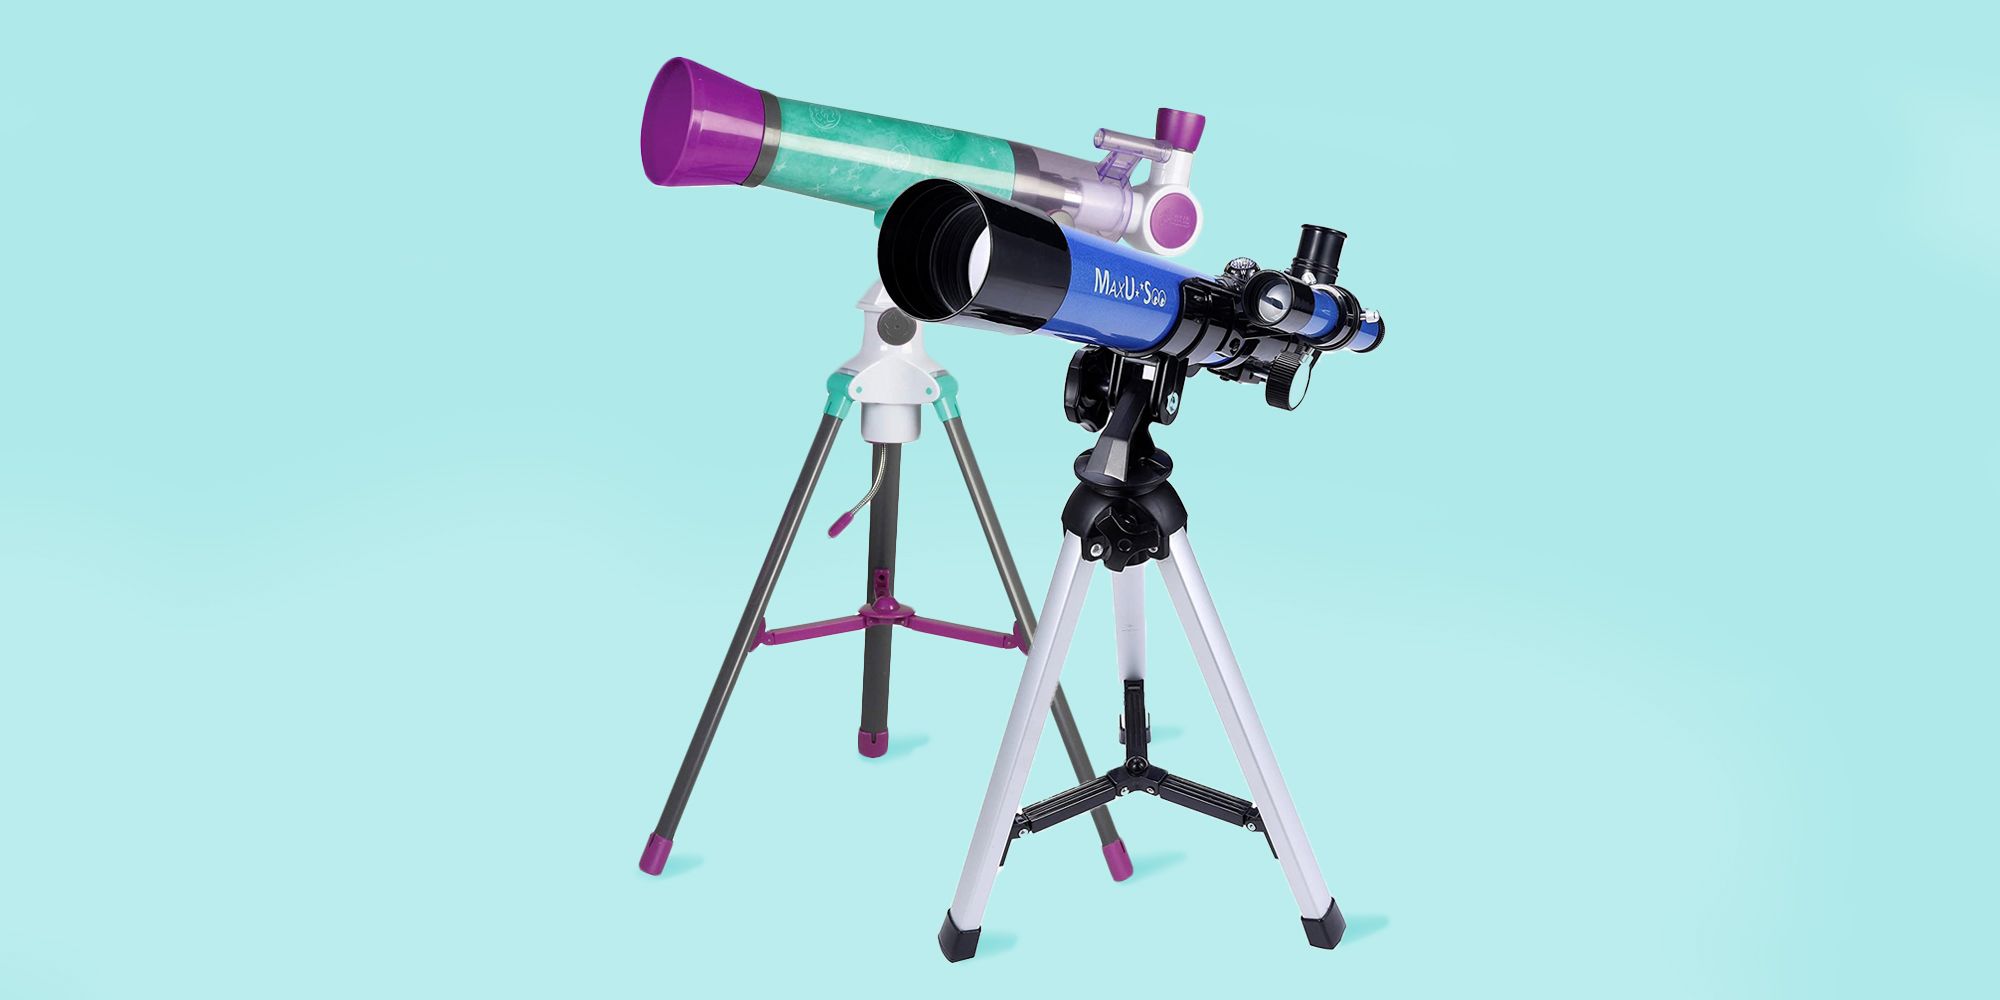 Astronomical Refractor Telescope Kids Telescope for Astronomy Beginners with Sturdy Steel Tripod Great Astronomy Gift for Kids to Explore Moon and Planets 